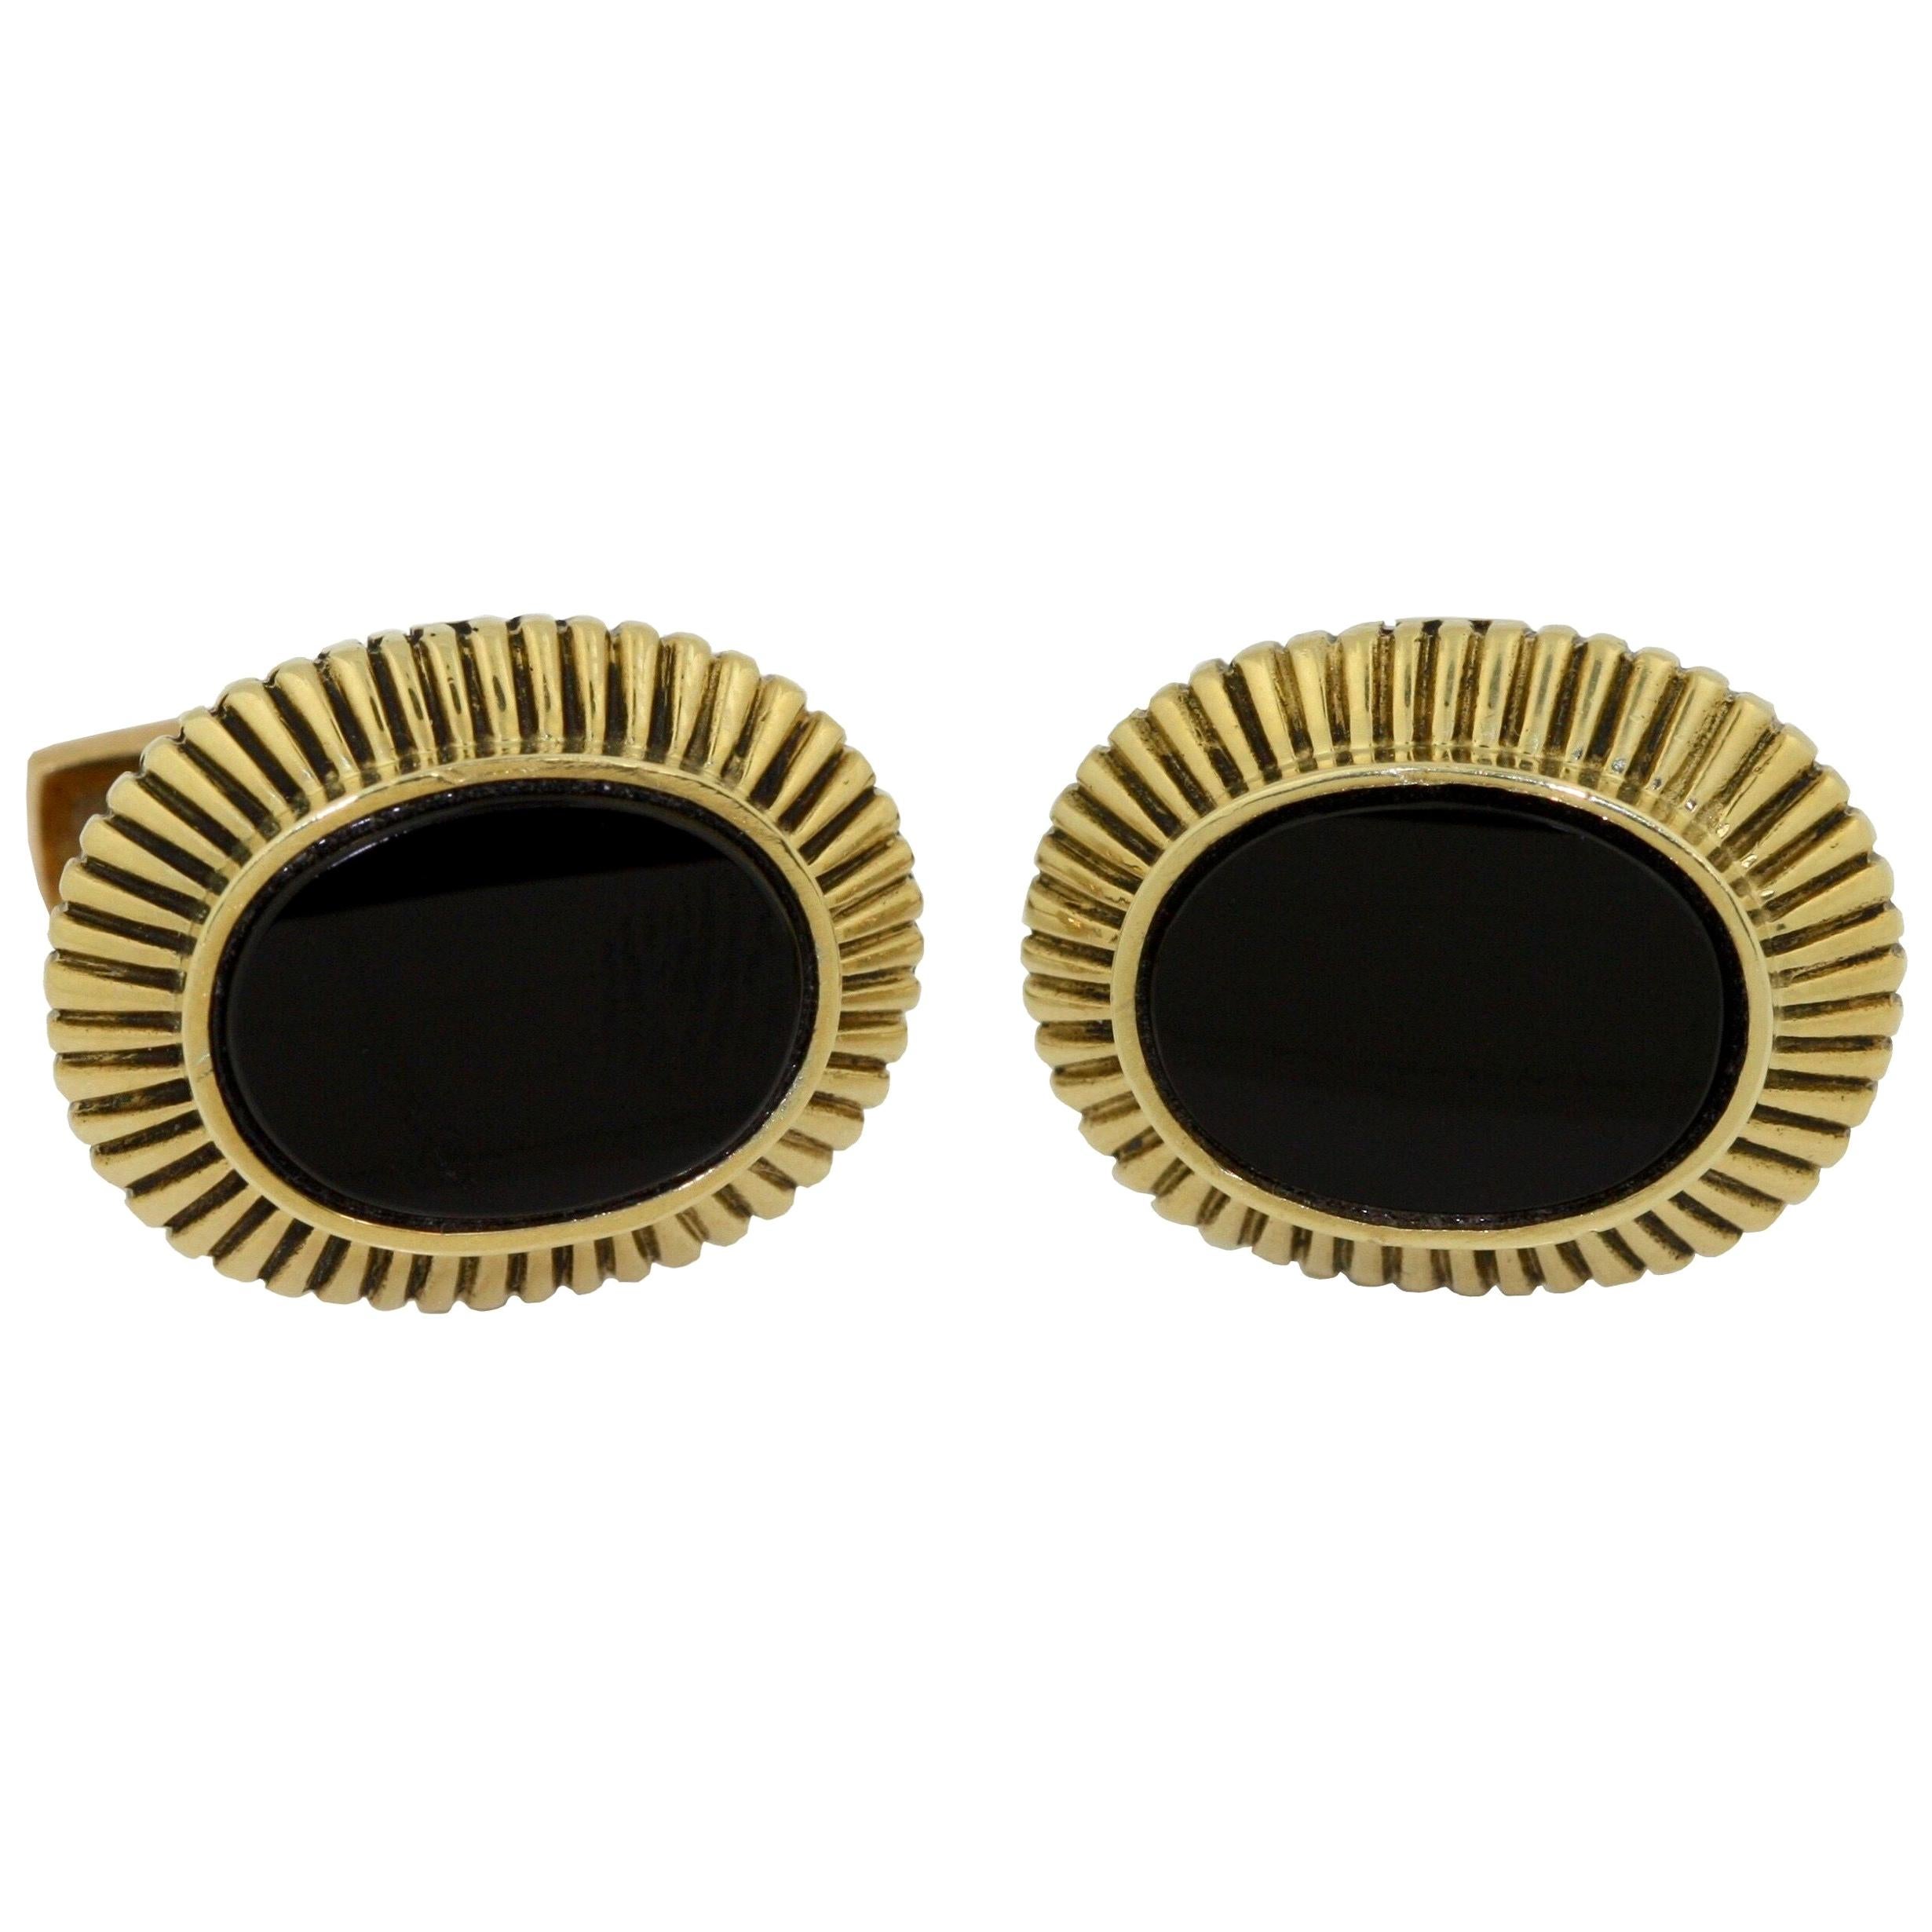 Pair of 18 Karat Gold and Onyx Cufflinks, Emis For Sale